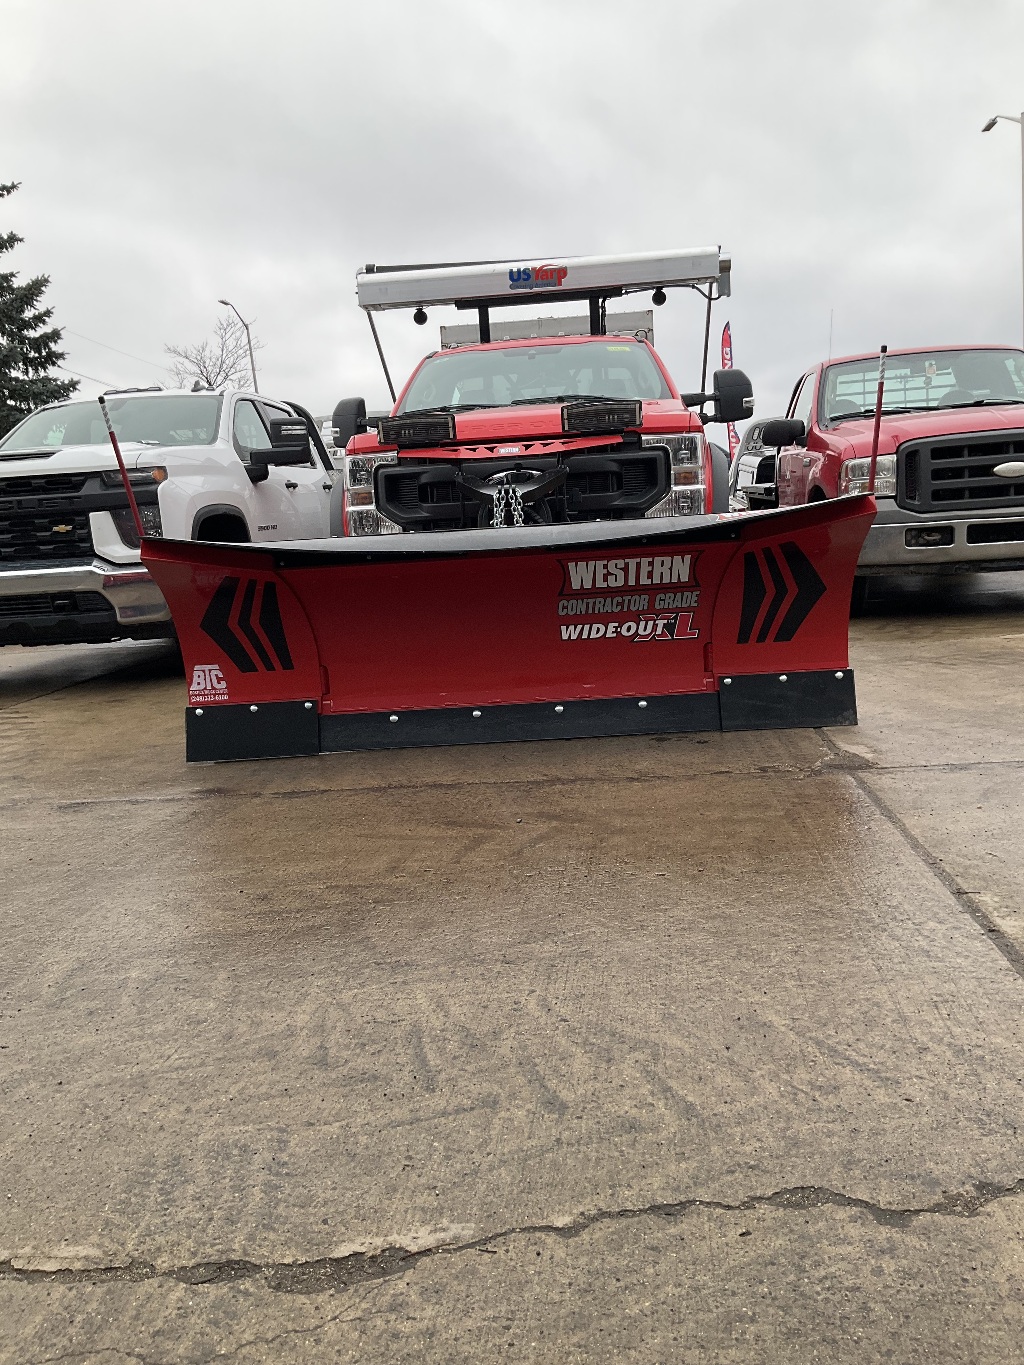  WESTERN Wide-Out XL Snow Plow #1